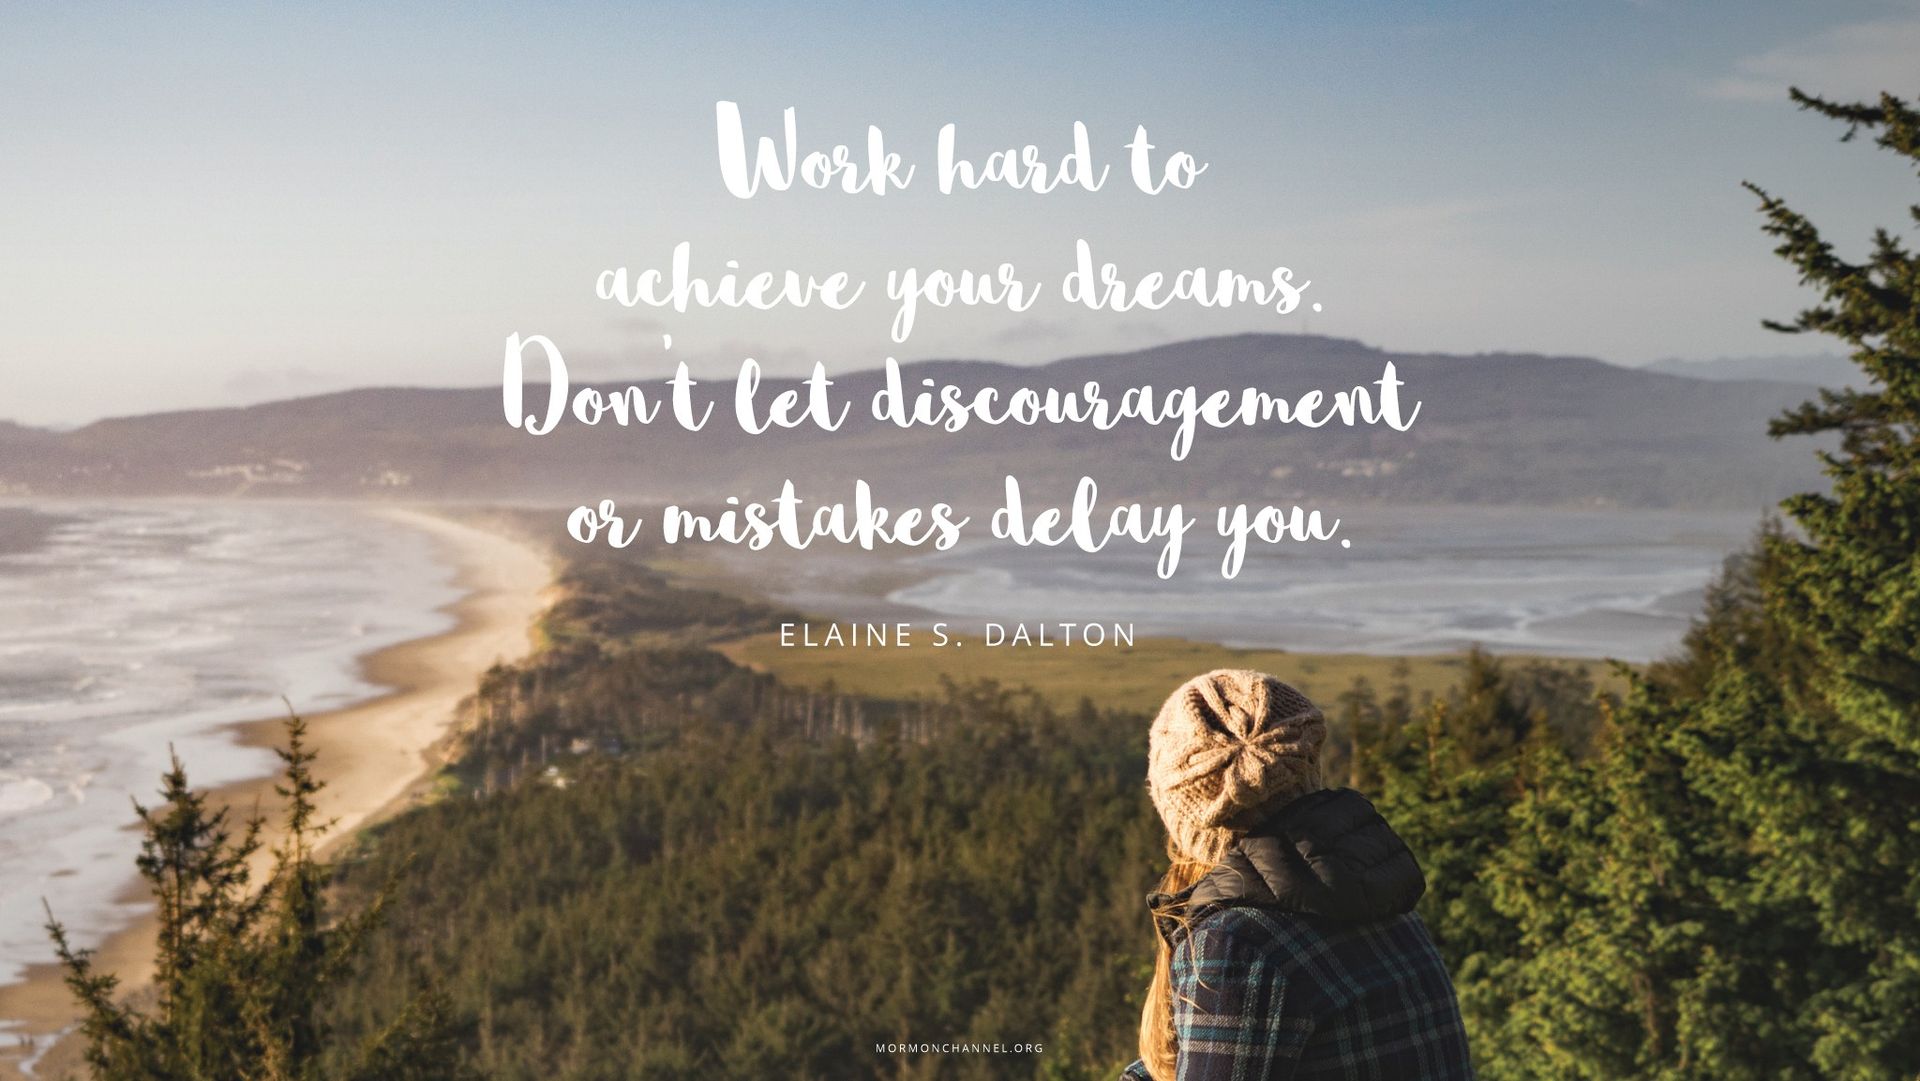 “Work hard to achieve your dreams. Don’t let discouragement or mistakes delay you.”—Sister Elaine S. Dalton, “How to Dare Great Things”